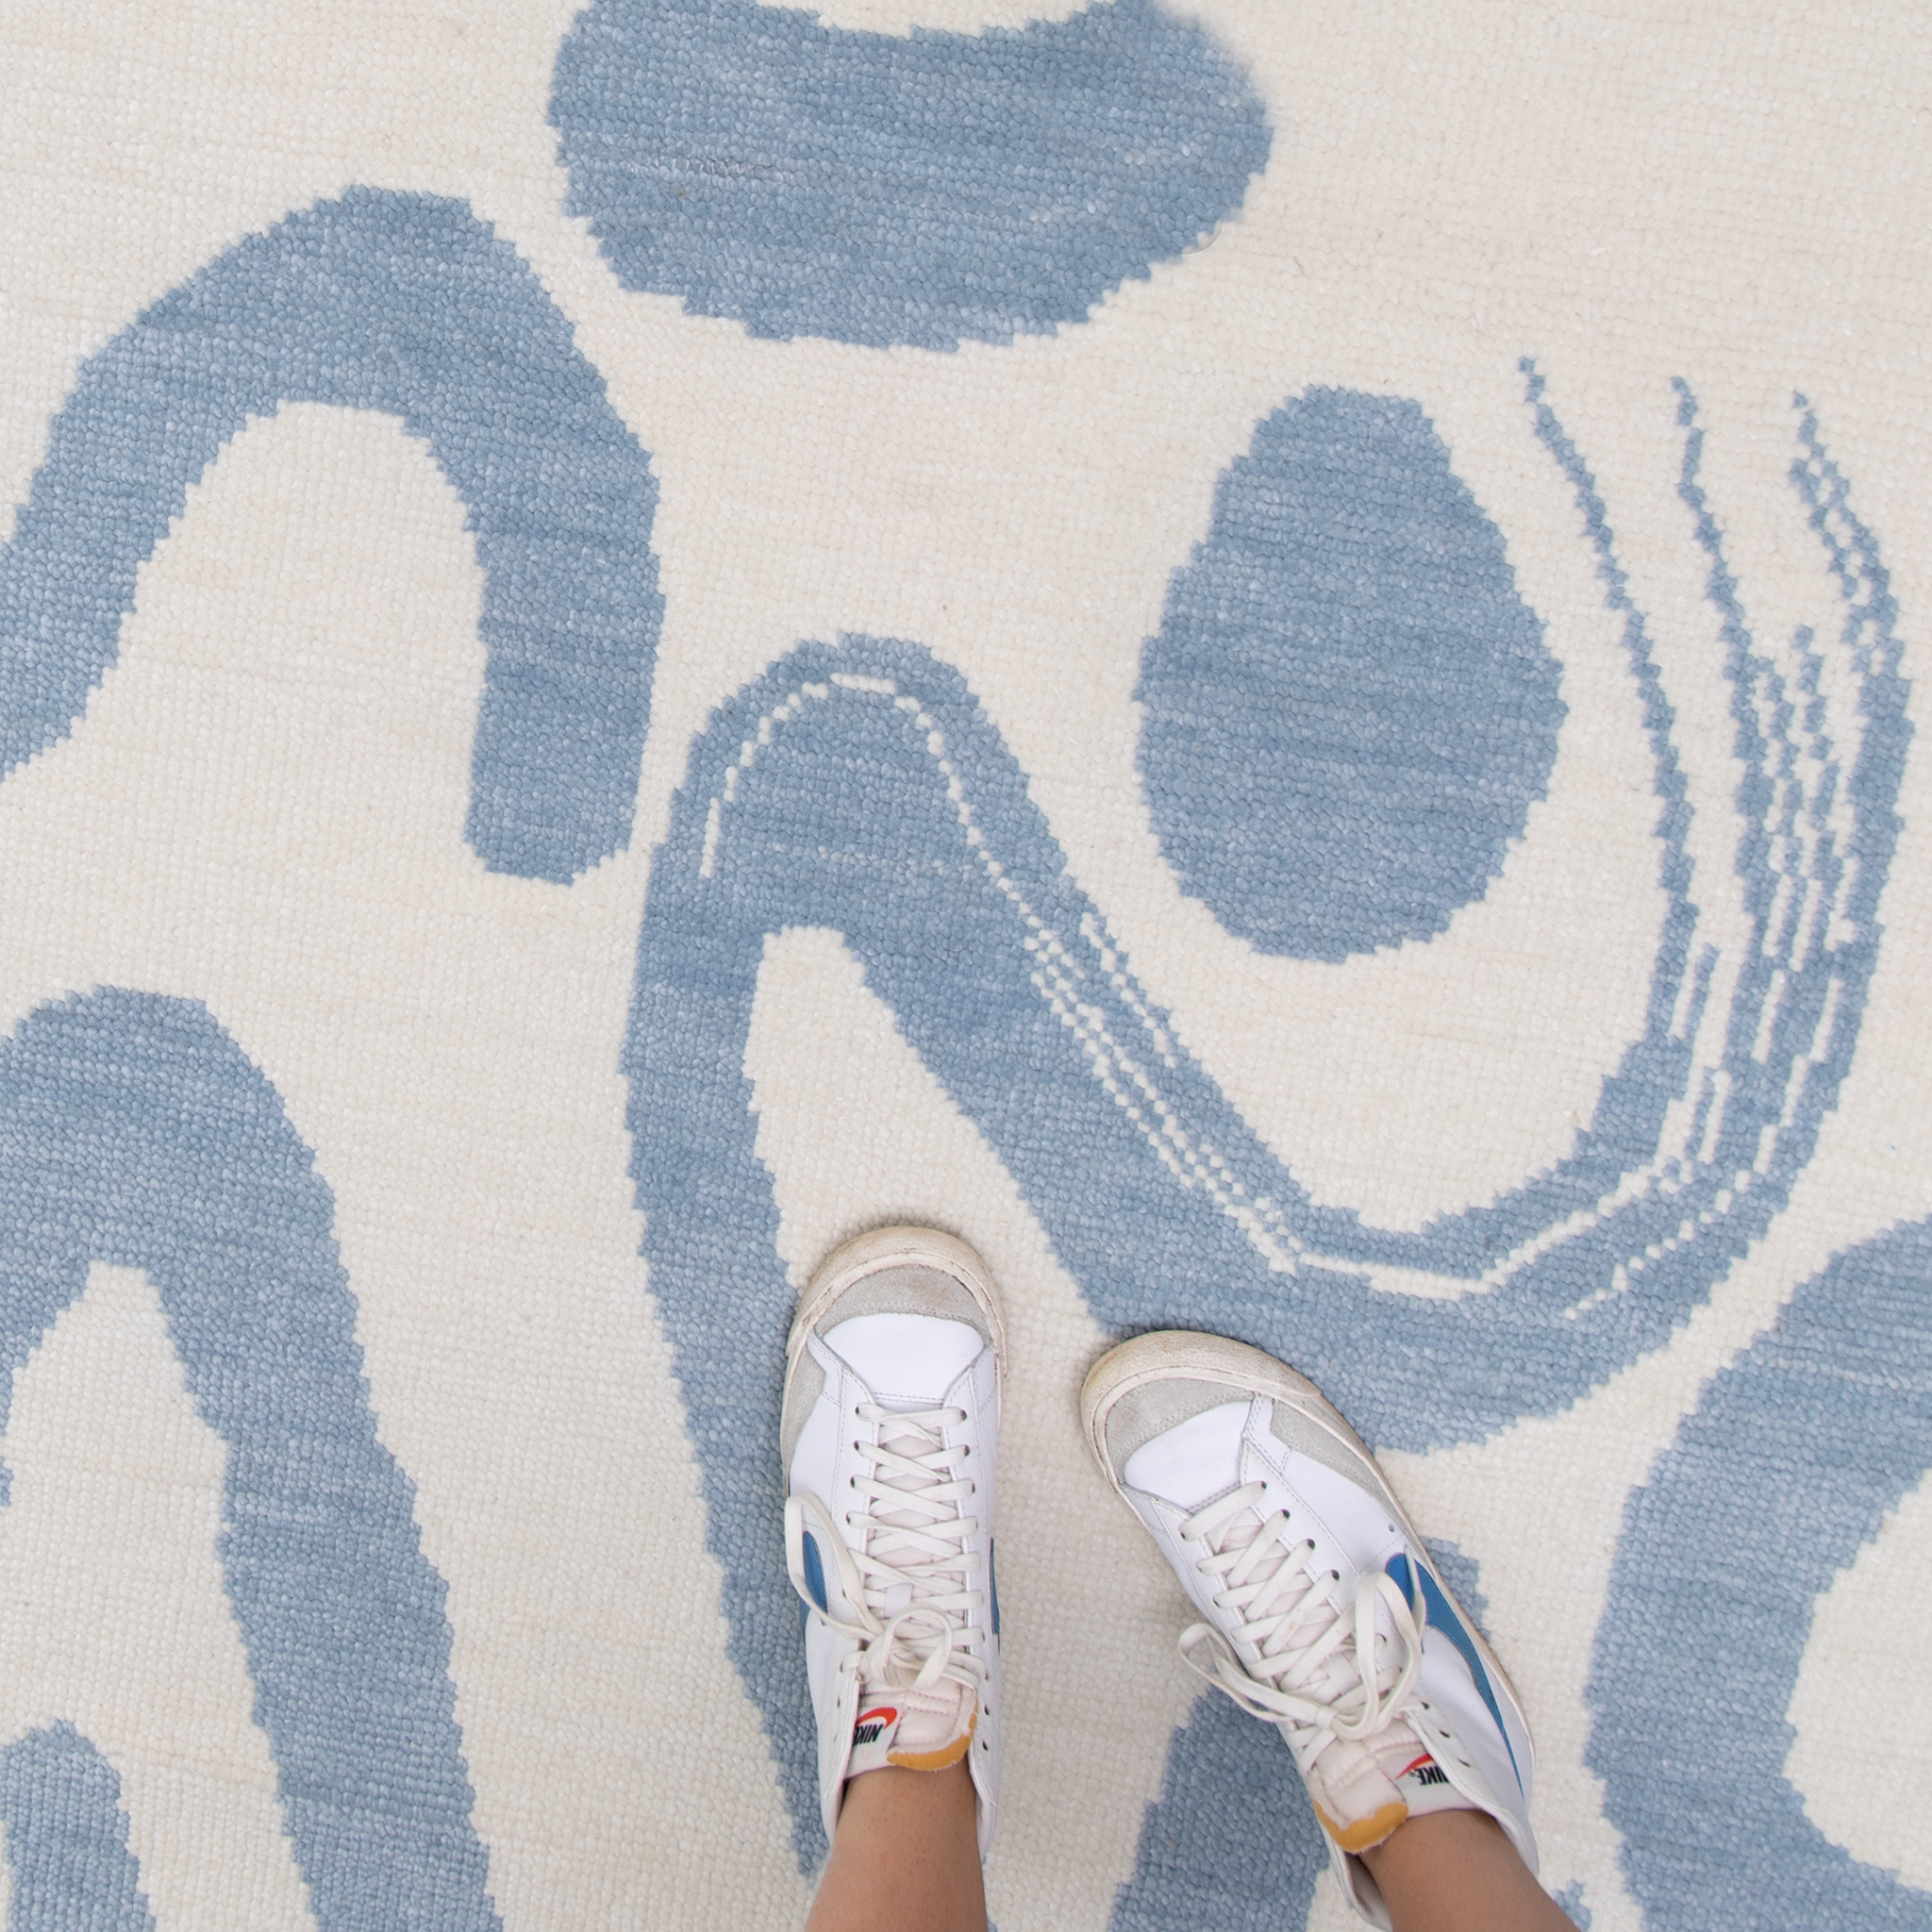 Sky Blue Printed Rug Close-up with white tennis shoes on woman's feet in the bottom right corner